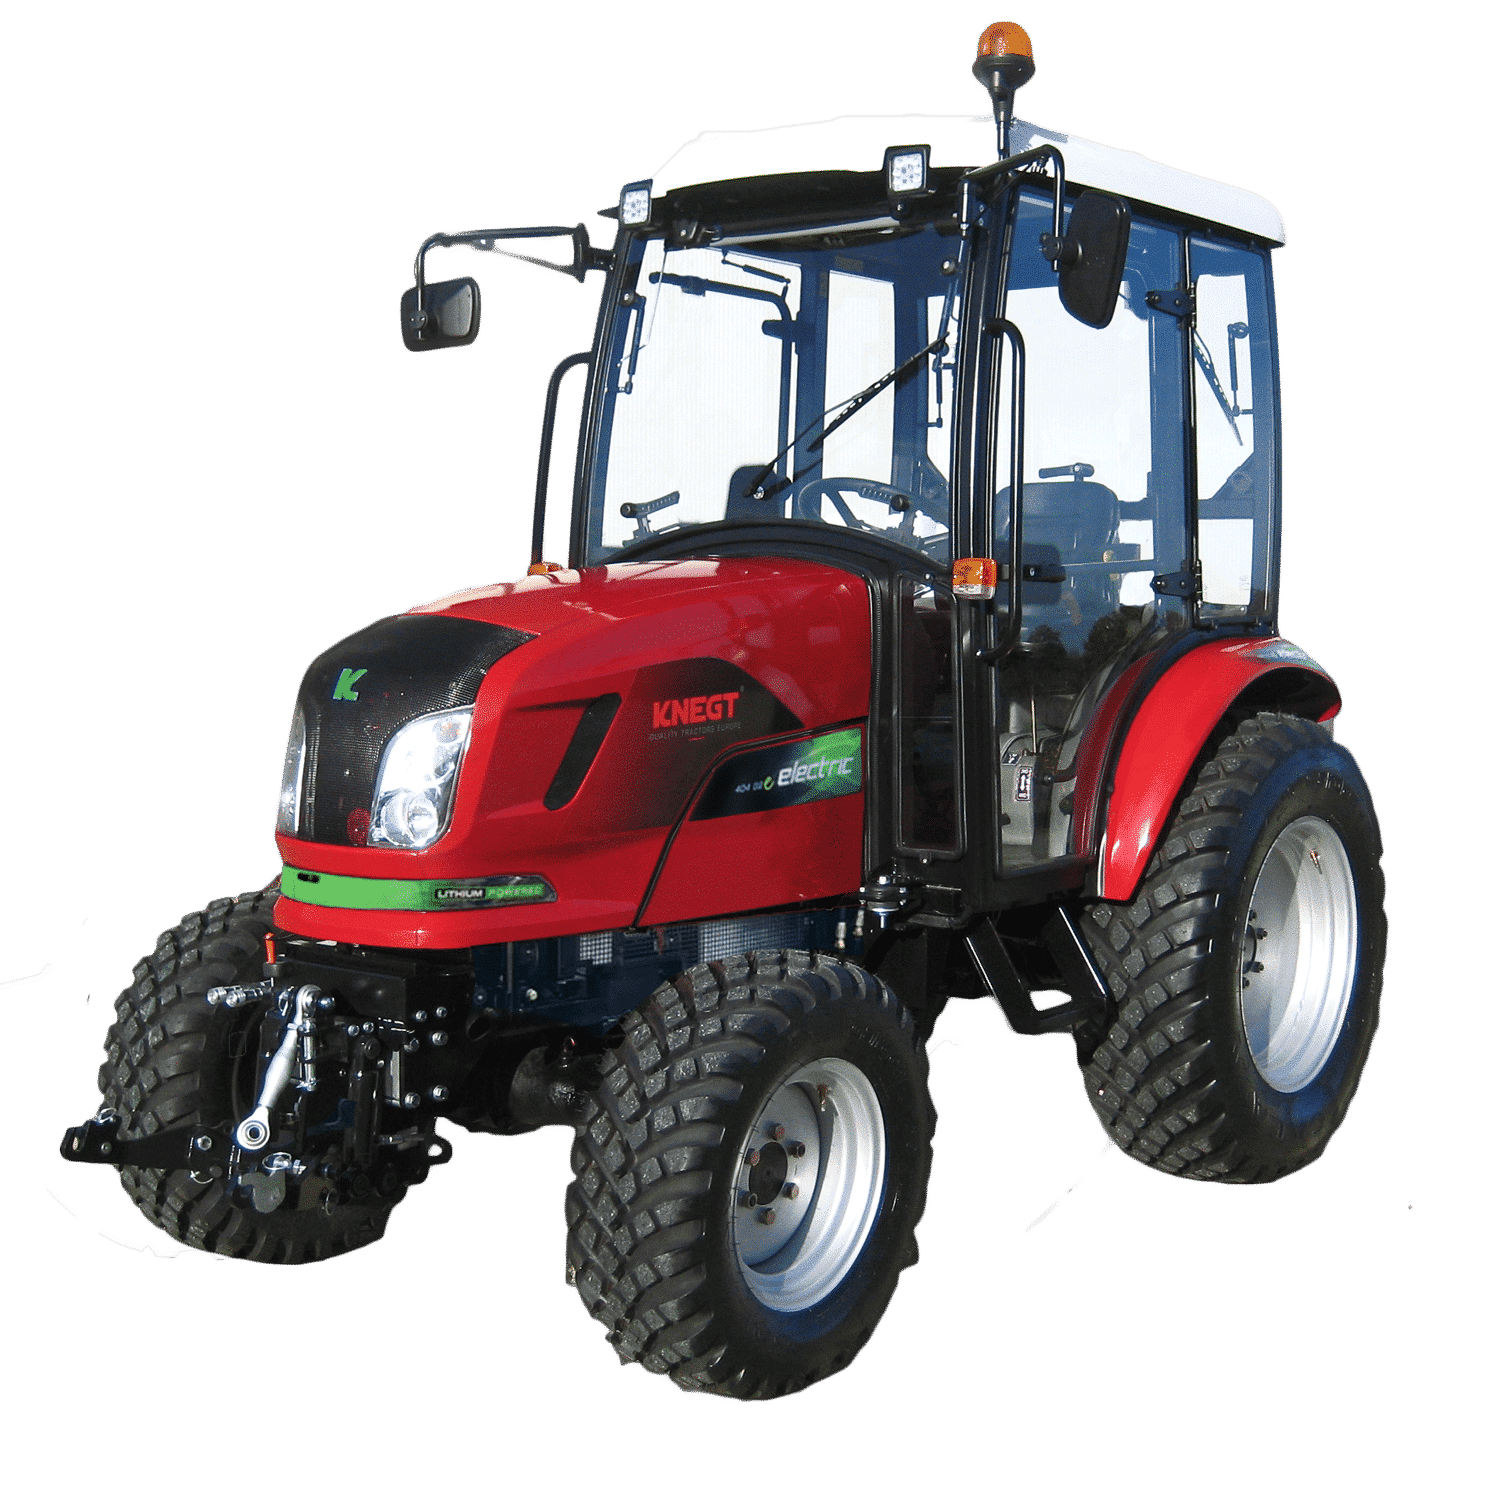 knegt_compact_tractor_404G2E_cabine_productfoto